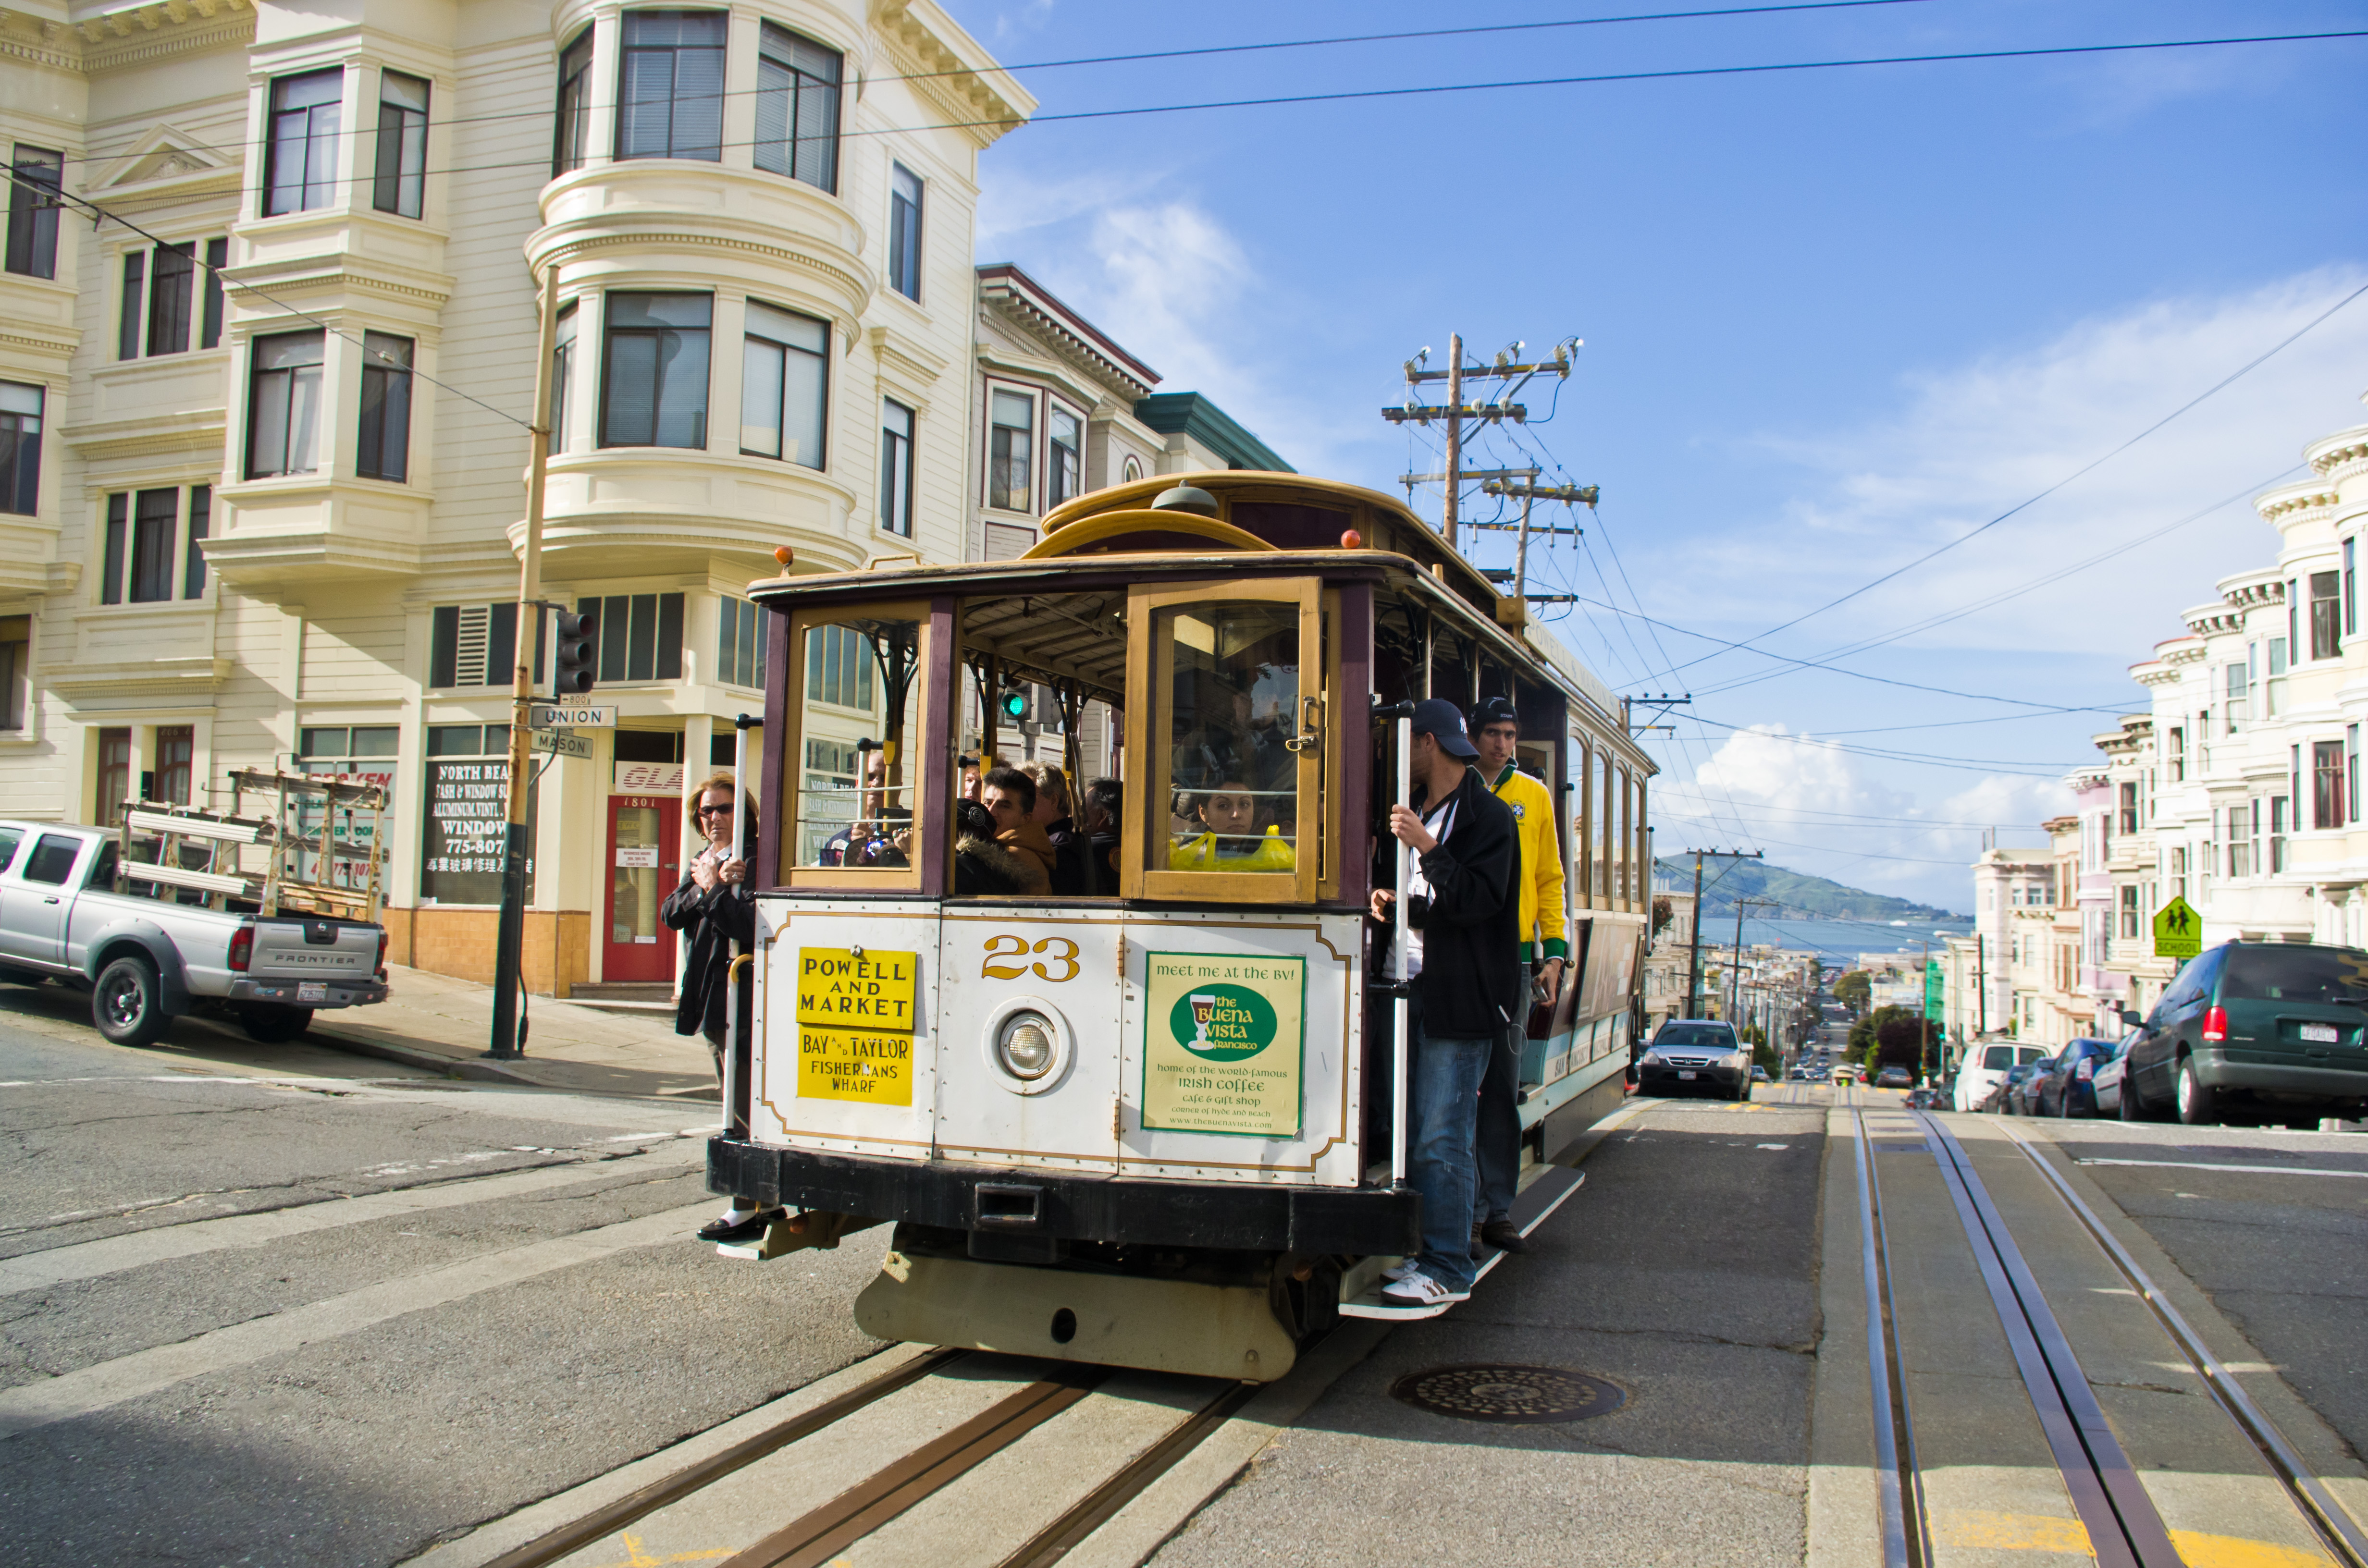 File:Cable cars SF7.jpg - Wikimedia Commons